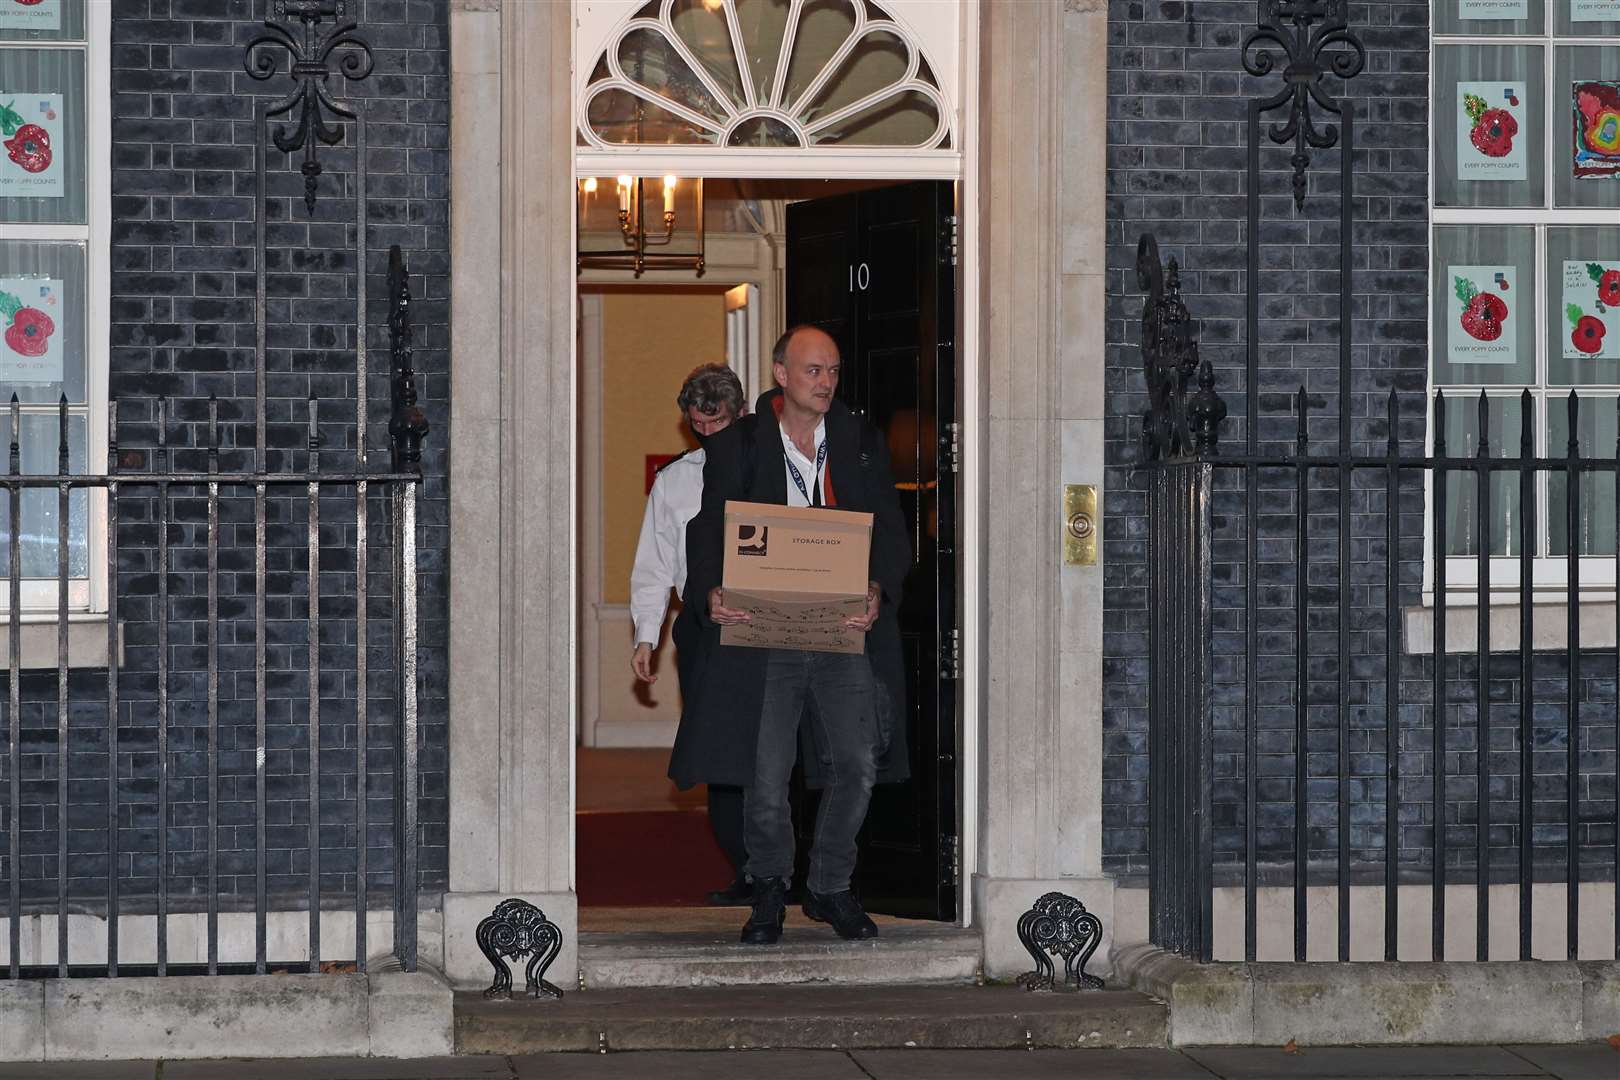 Dominic Cummings left 10 Downing Street following a behind the scenes row in November (Yui Mok/PA)